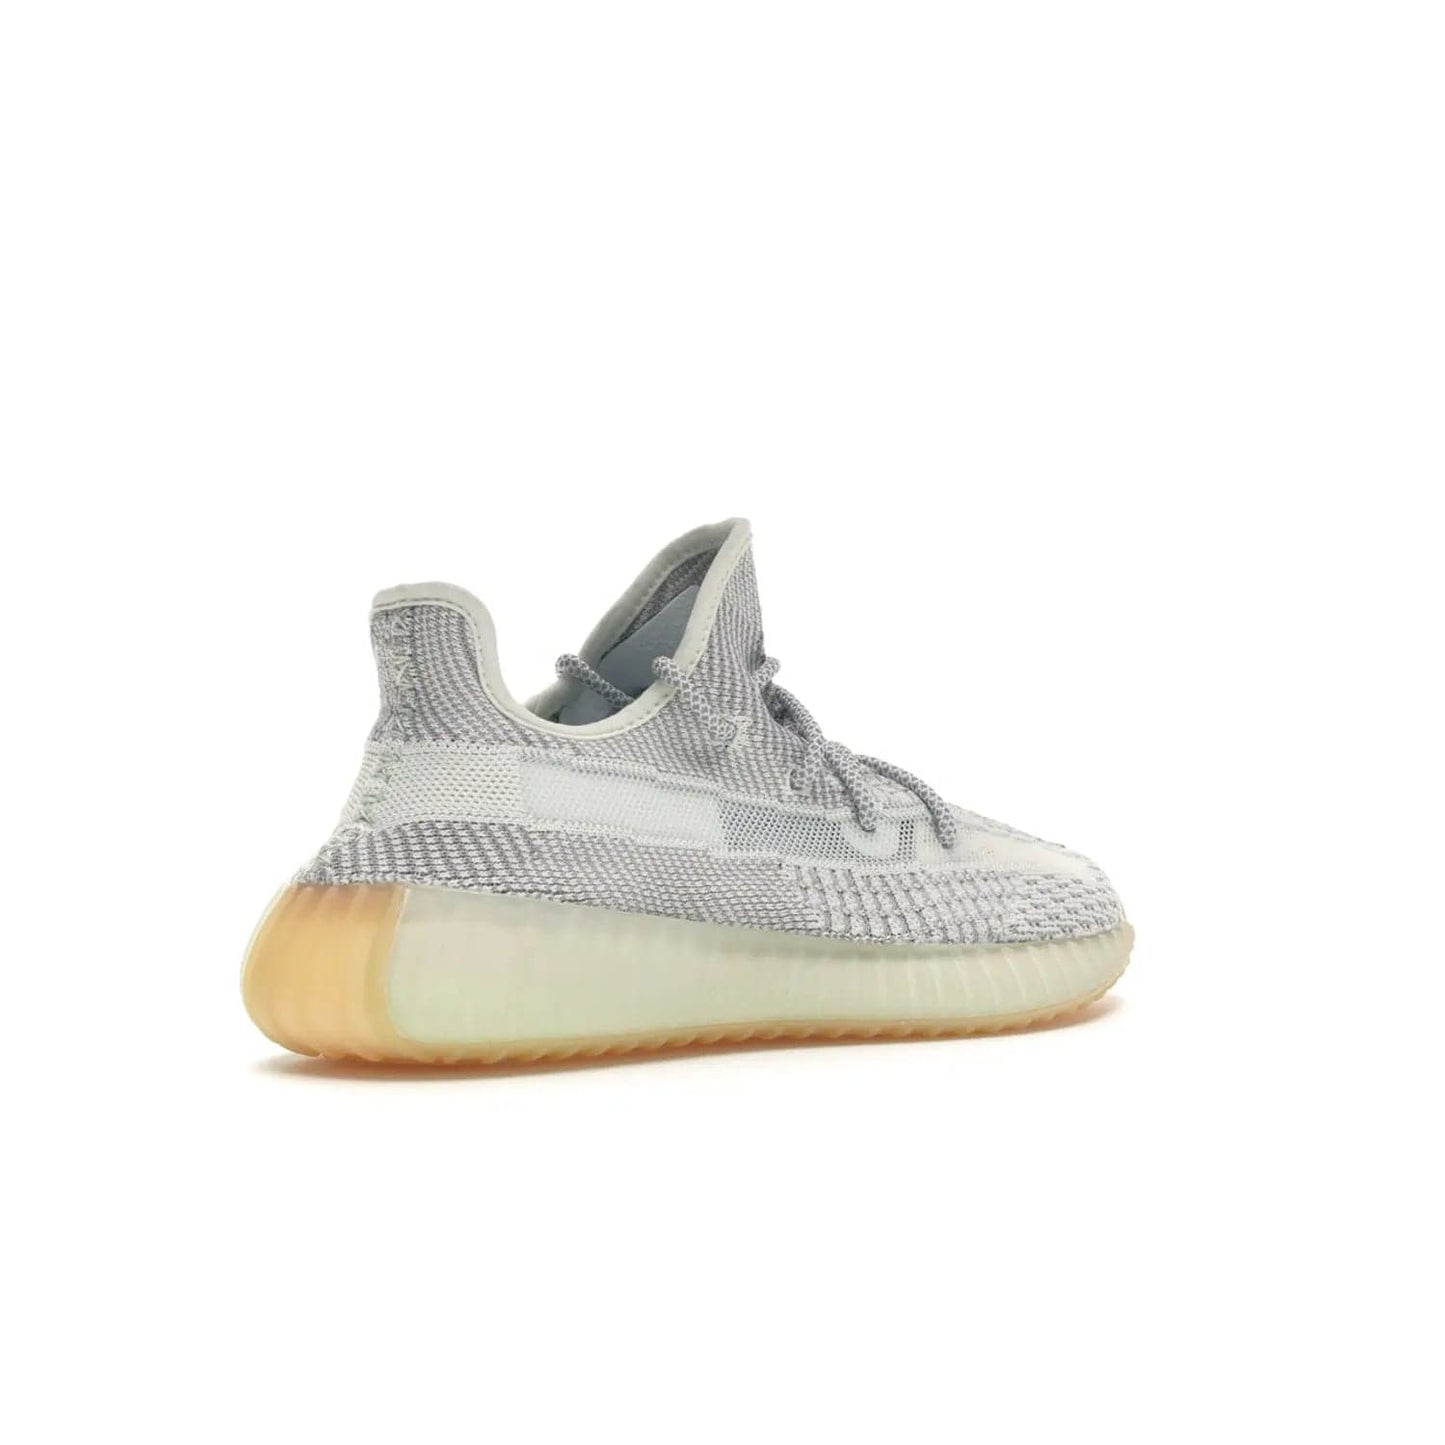 adidas Yeezy Boost 350 V2 Yeshaya (Non-Reflective) - Image 33 - Only at www.BallersClubKickz.com - Step out in style with the adidas Yeezy Boost 350 V2 Yeshaya (Non-Reflective). Gray-and-white Primeknit upper with mesh side stripe & rope laces, plus a translucent Boost sole with a hint of yellow. Make a statement and feel comfortable with this stylish sneaker.